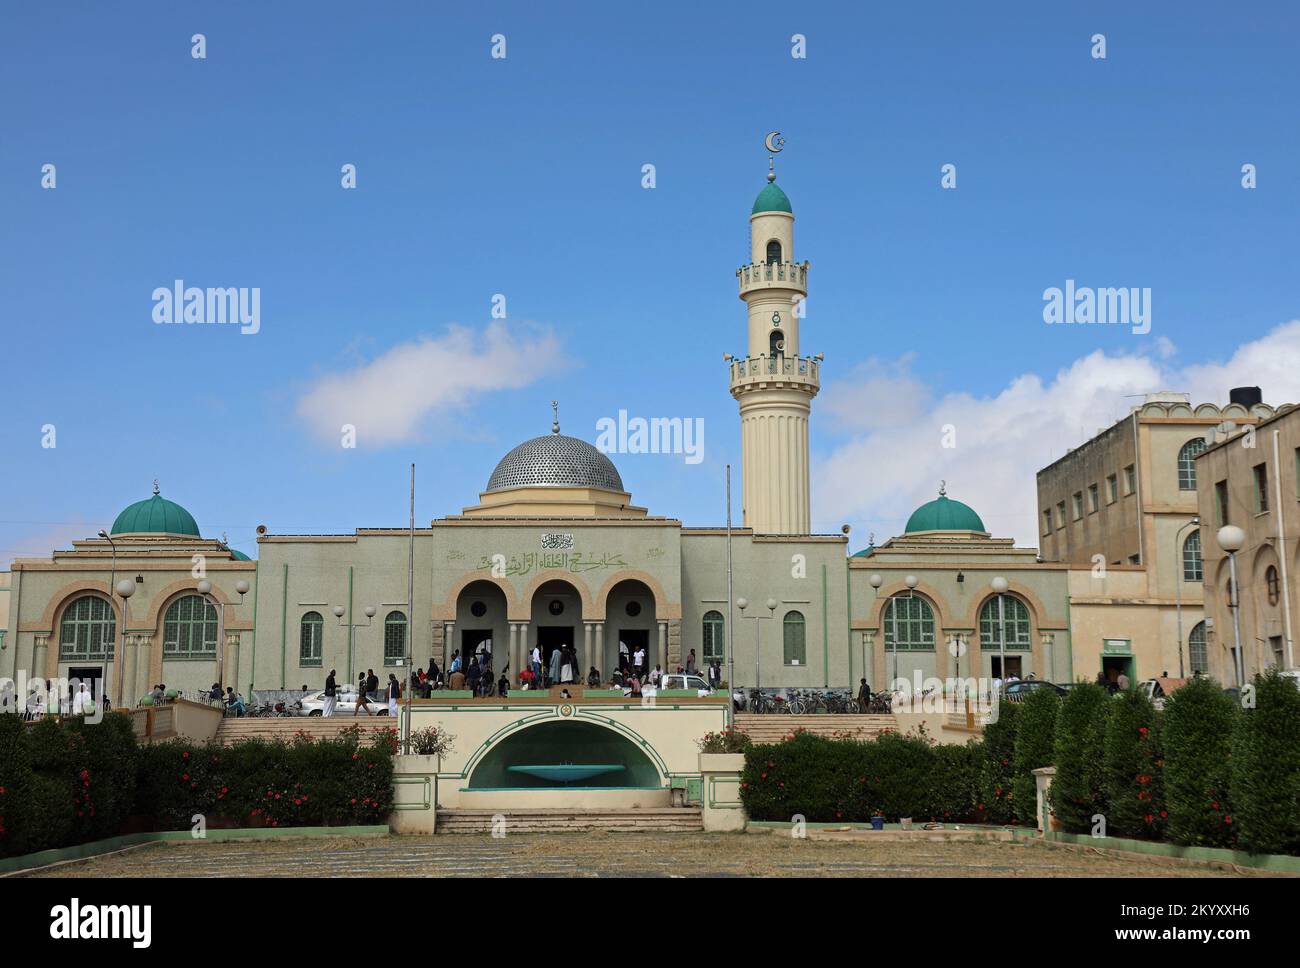 Great Mosque of Asmara built by the Italians in Eritrea Stock Photo